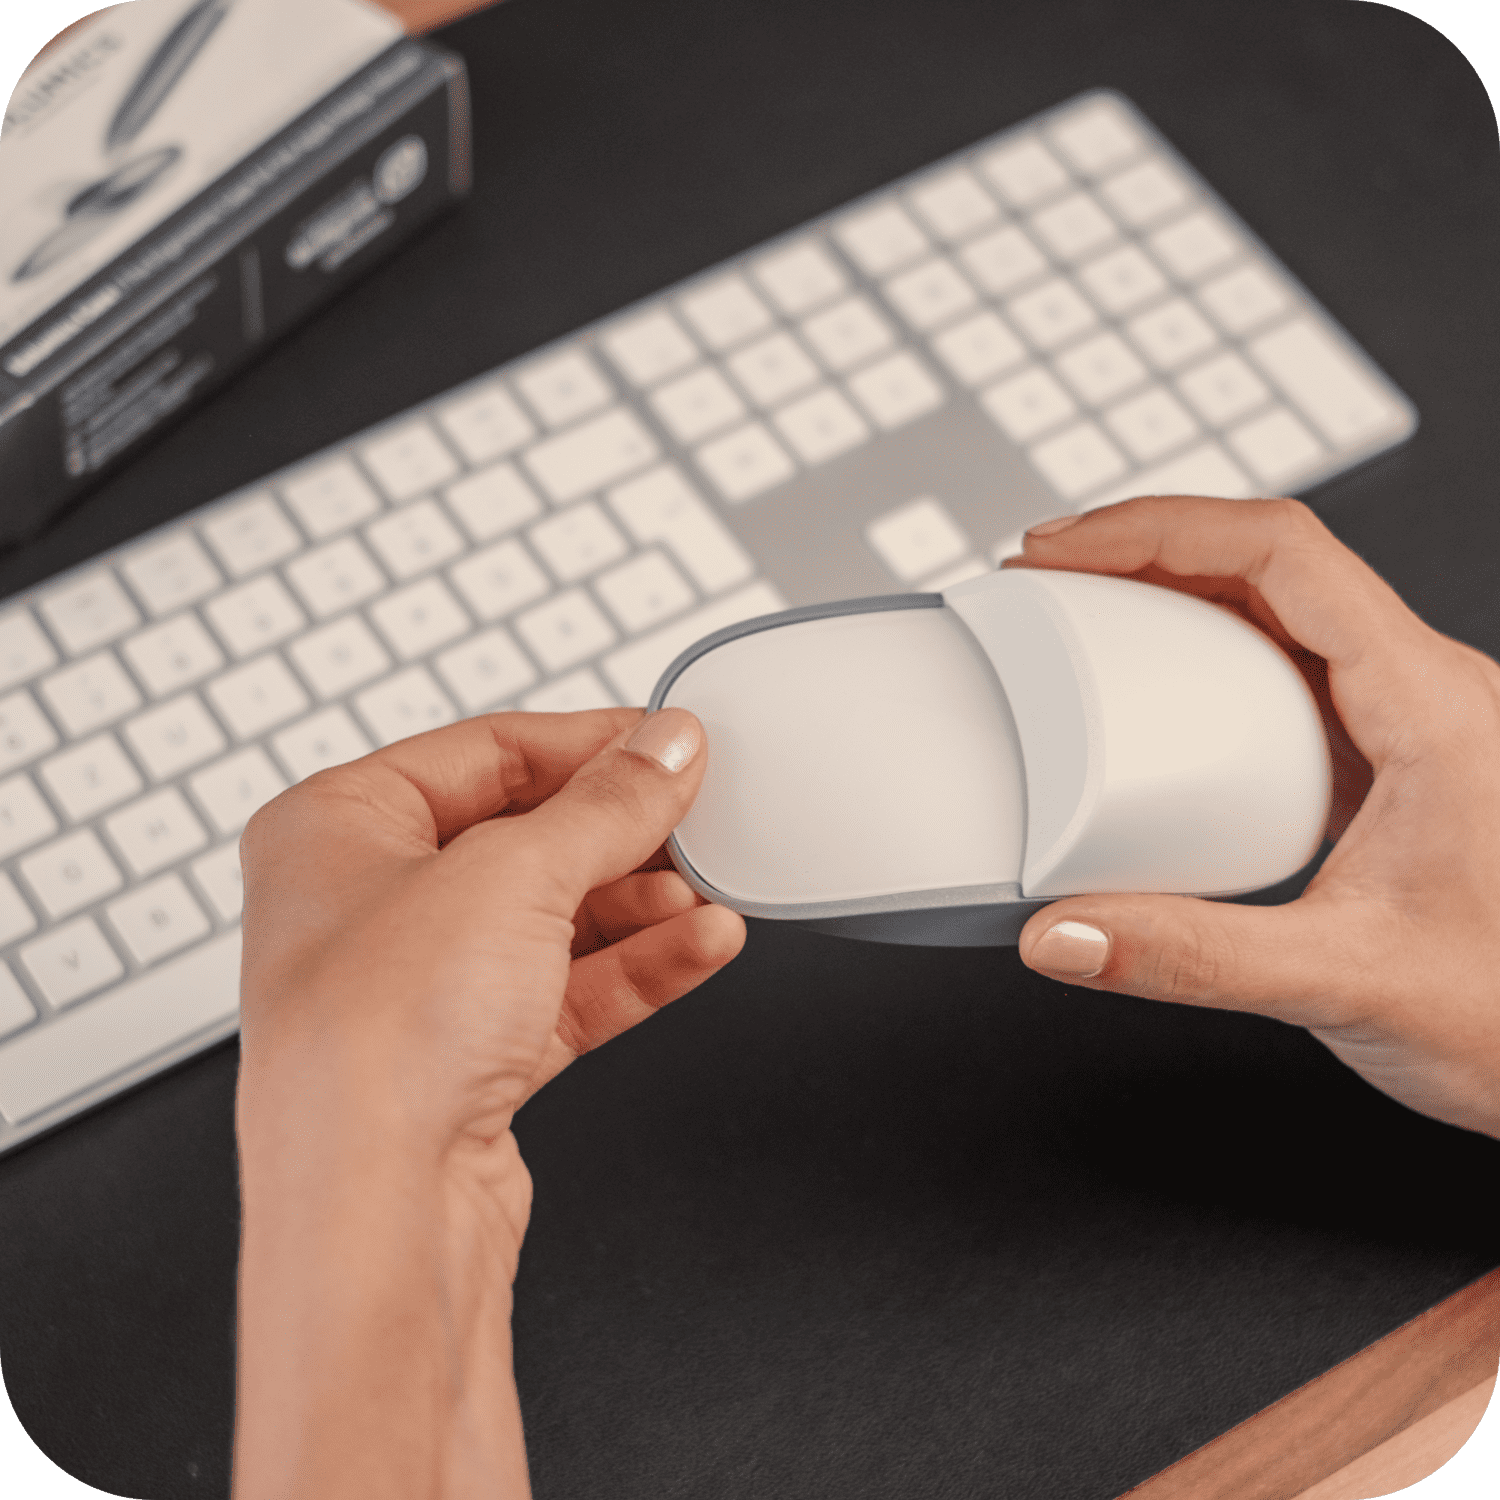  FIDECO Mouse Dock, Compatible with Apple Magic Mouse 2, Mouse  Grip for Magic Mouse, Ergonomic Design, Increase Comfort and Full Control :  Electronics